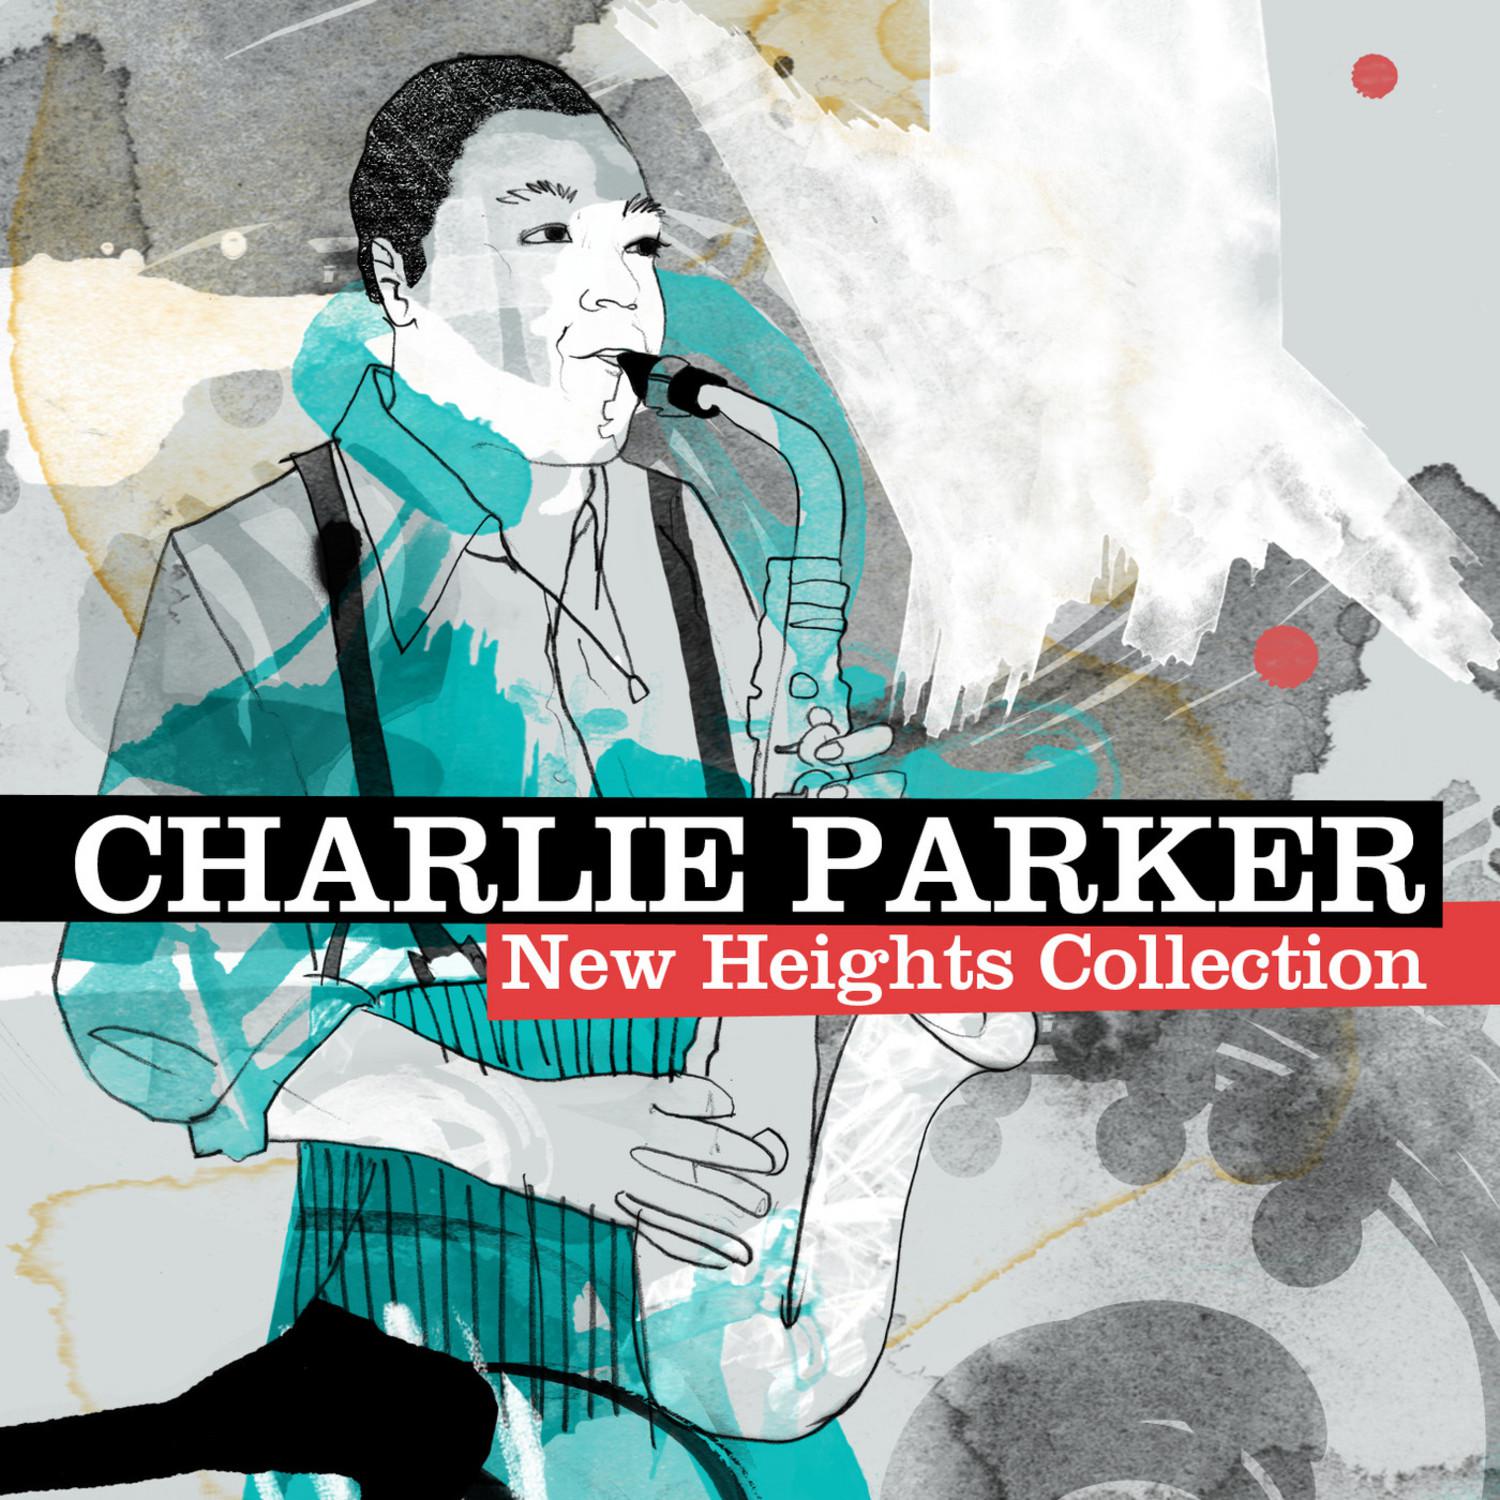 Charlie Parker - New Heights Collection